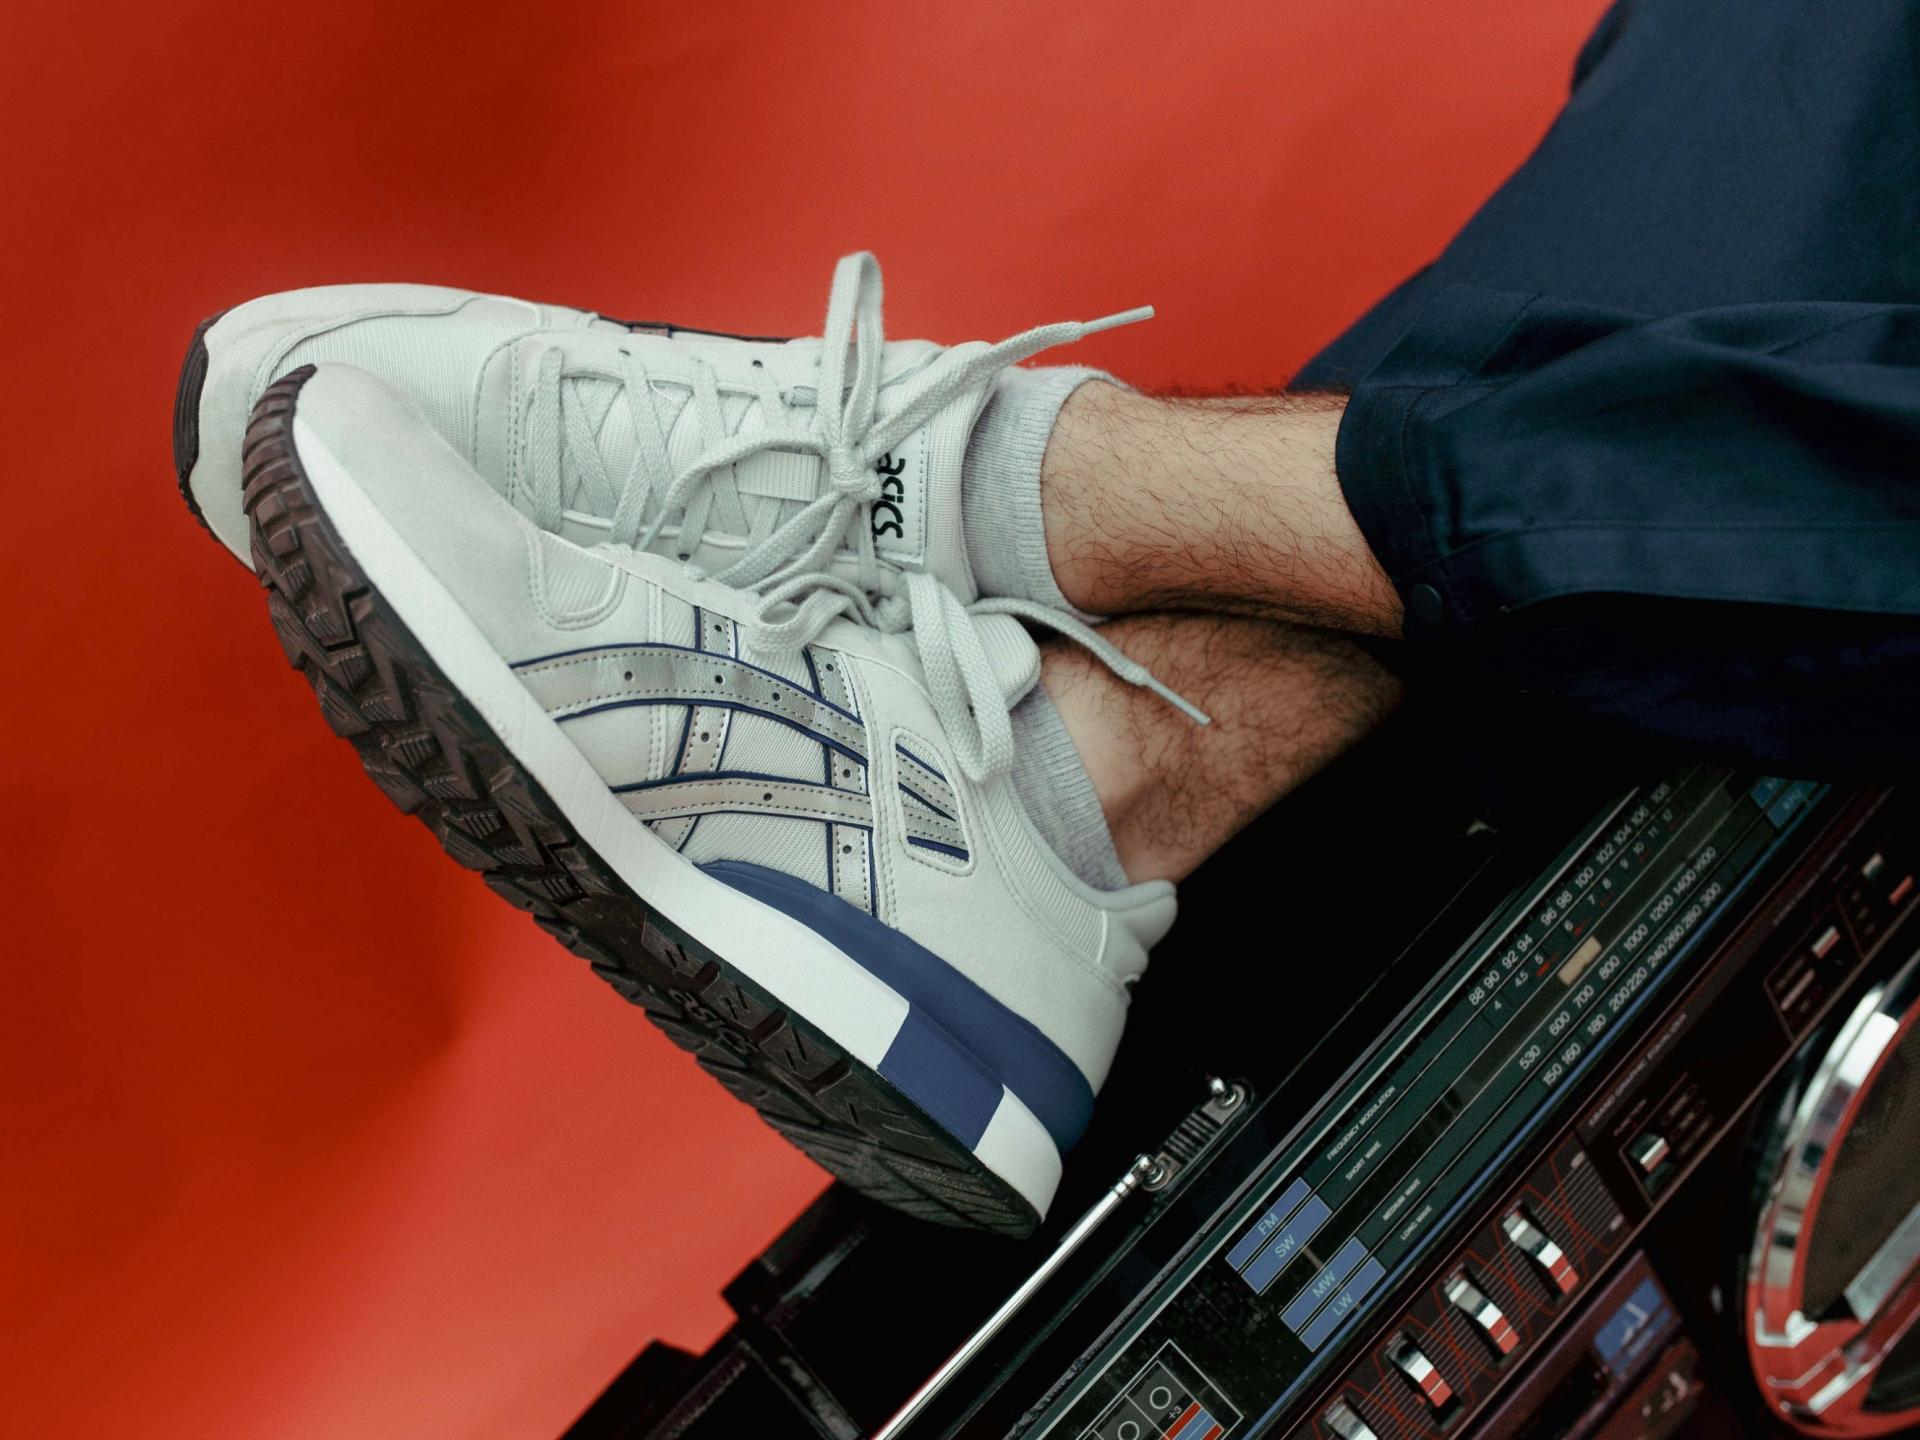 Asics GT-II: first GEL technology sneaker is back after 35 years | FTSHP